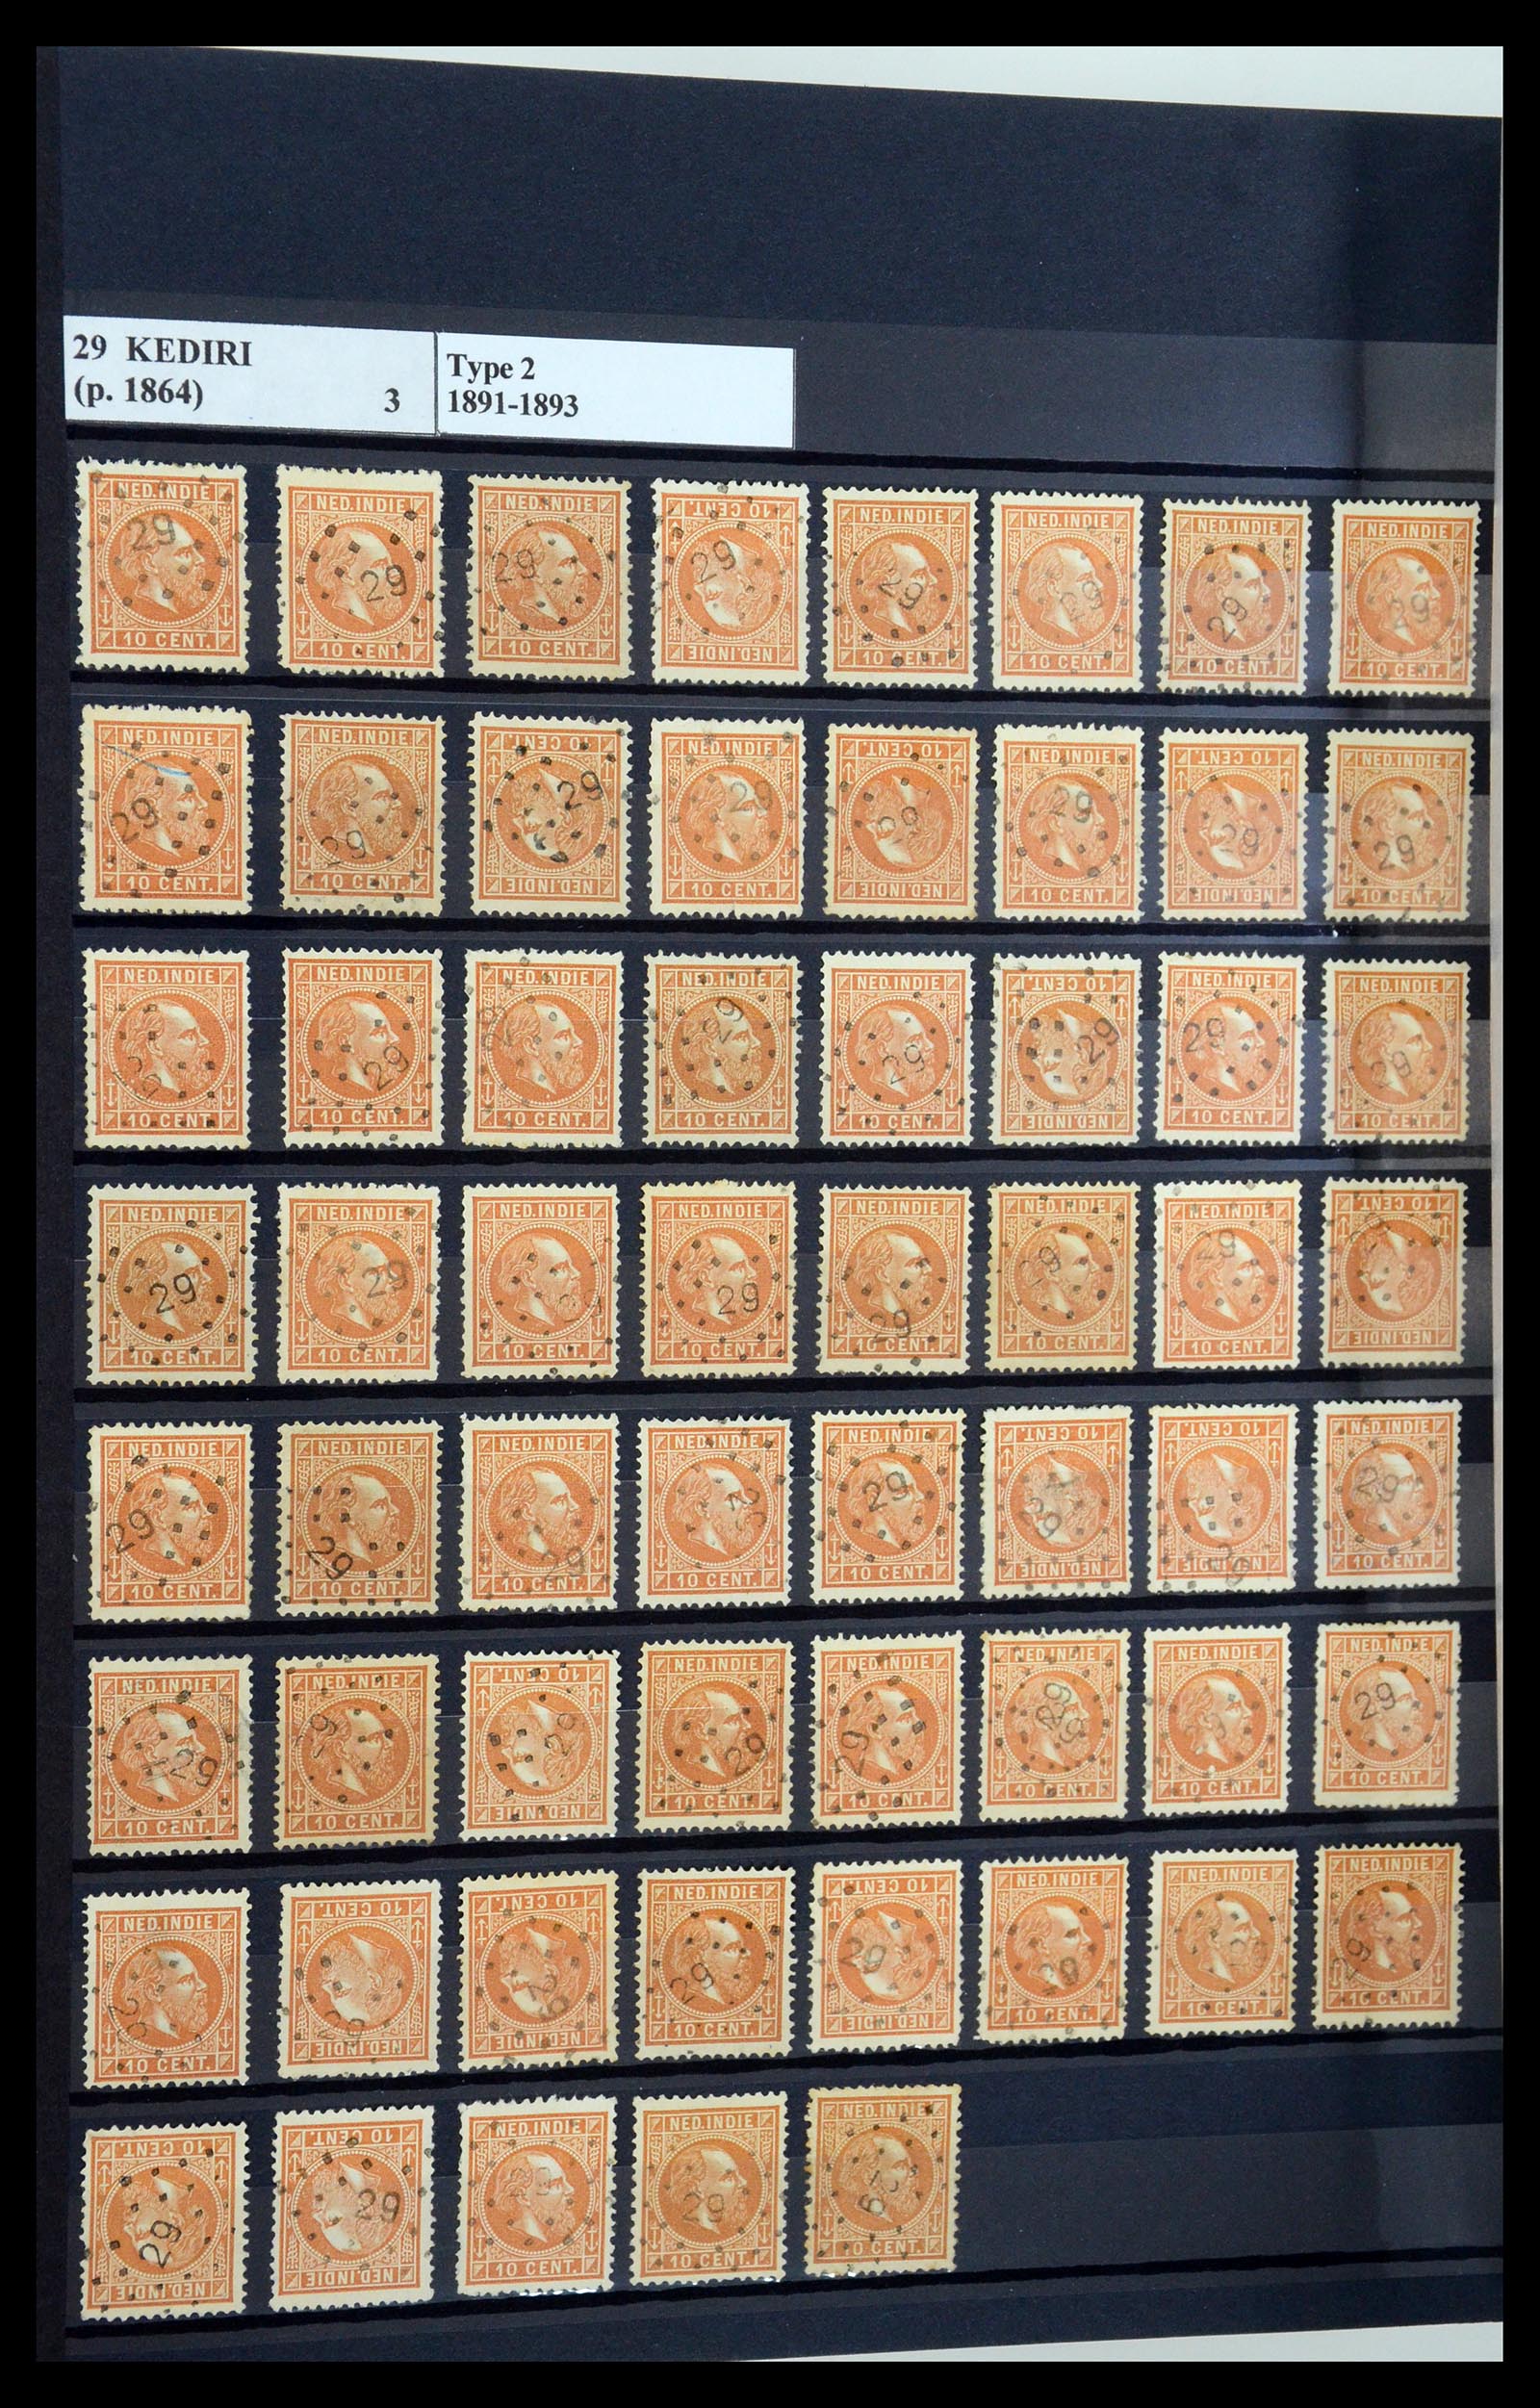 35602 040 - Stamp Collection 35602 Dutch east Indies numeral cancels.